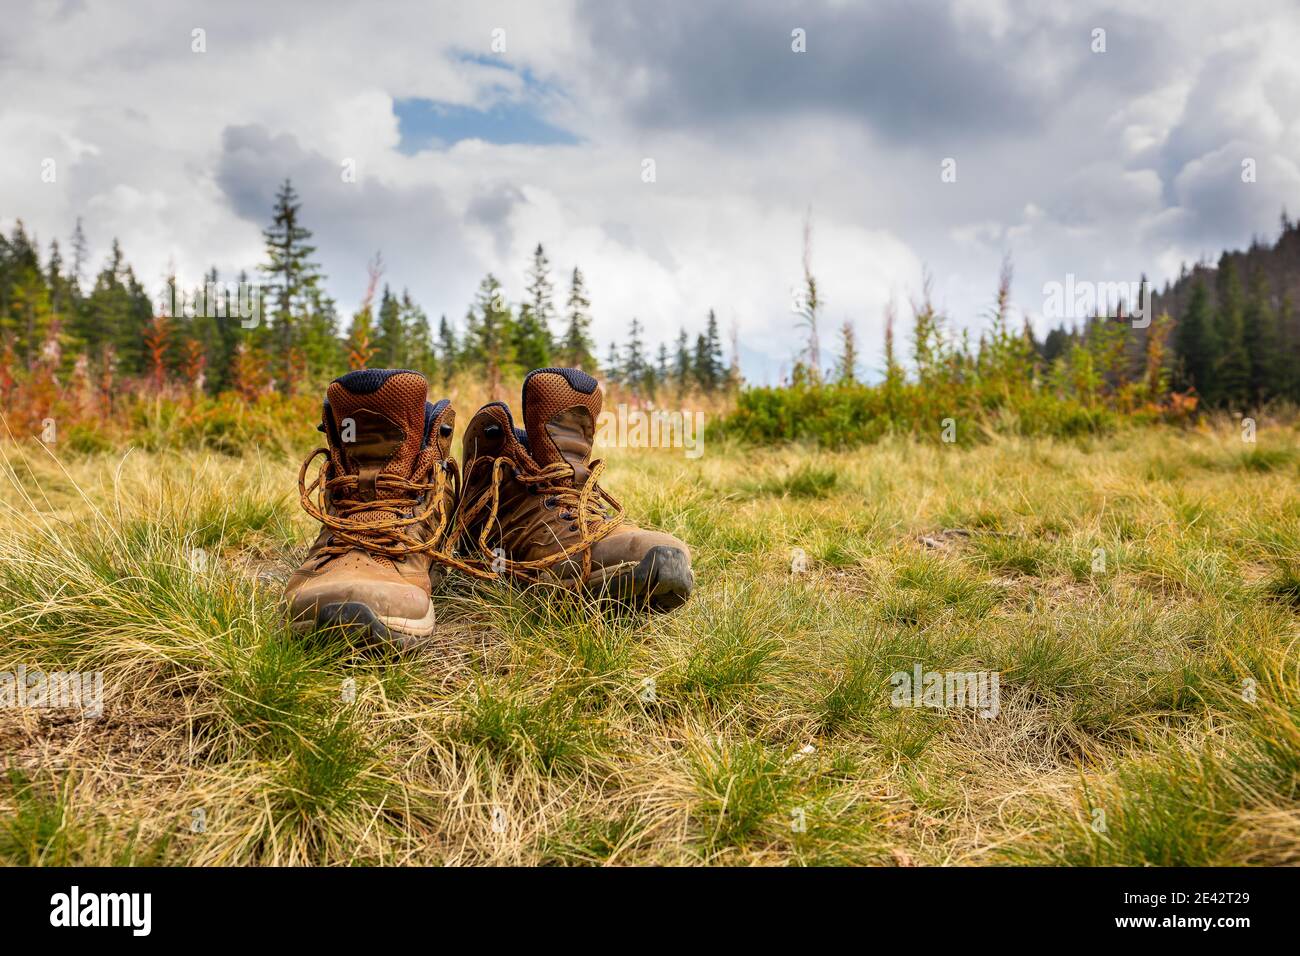 Trekking shoes standing on dry autumn grass on a mountain glade Rowien Waksmundzka with pine trees and spruces in the background, in Tatra Mountains, Stock Photo